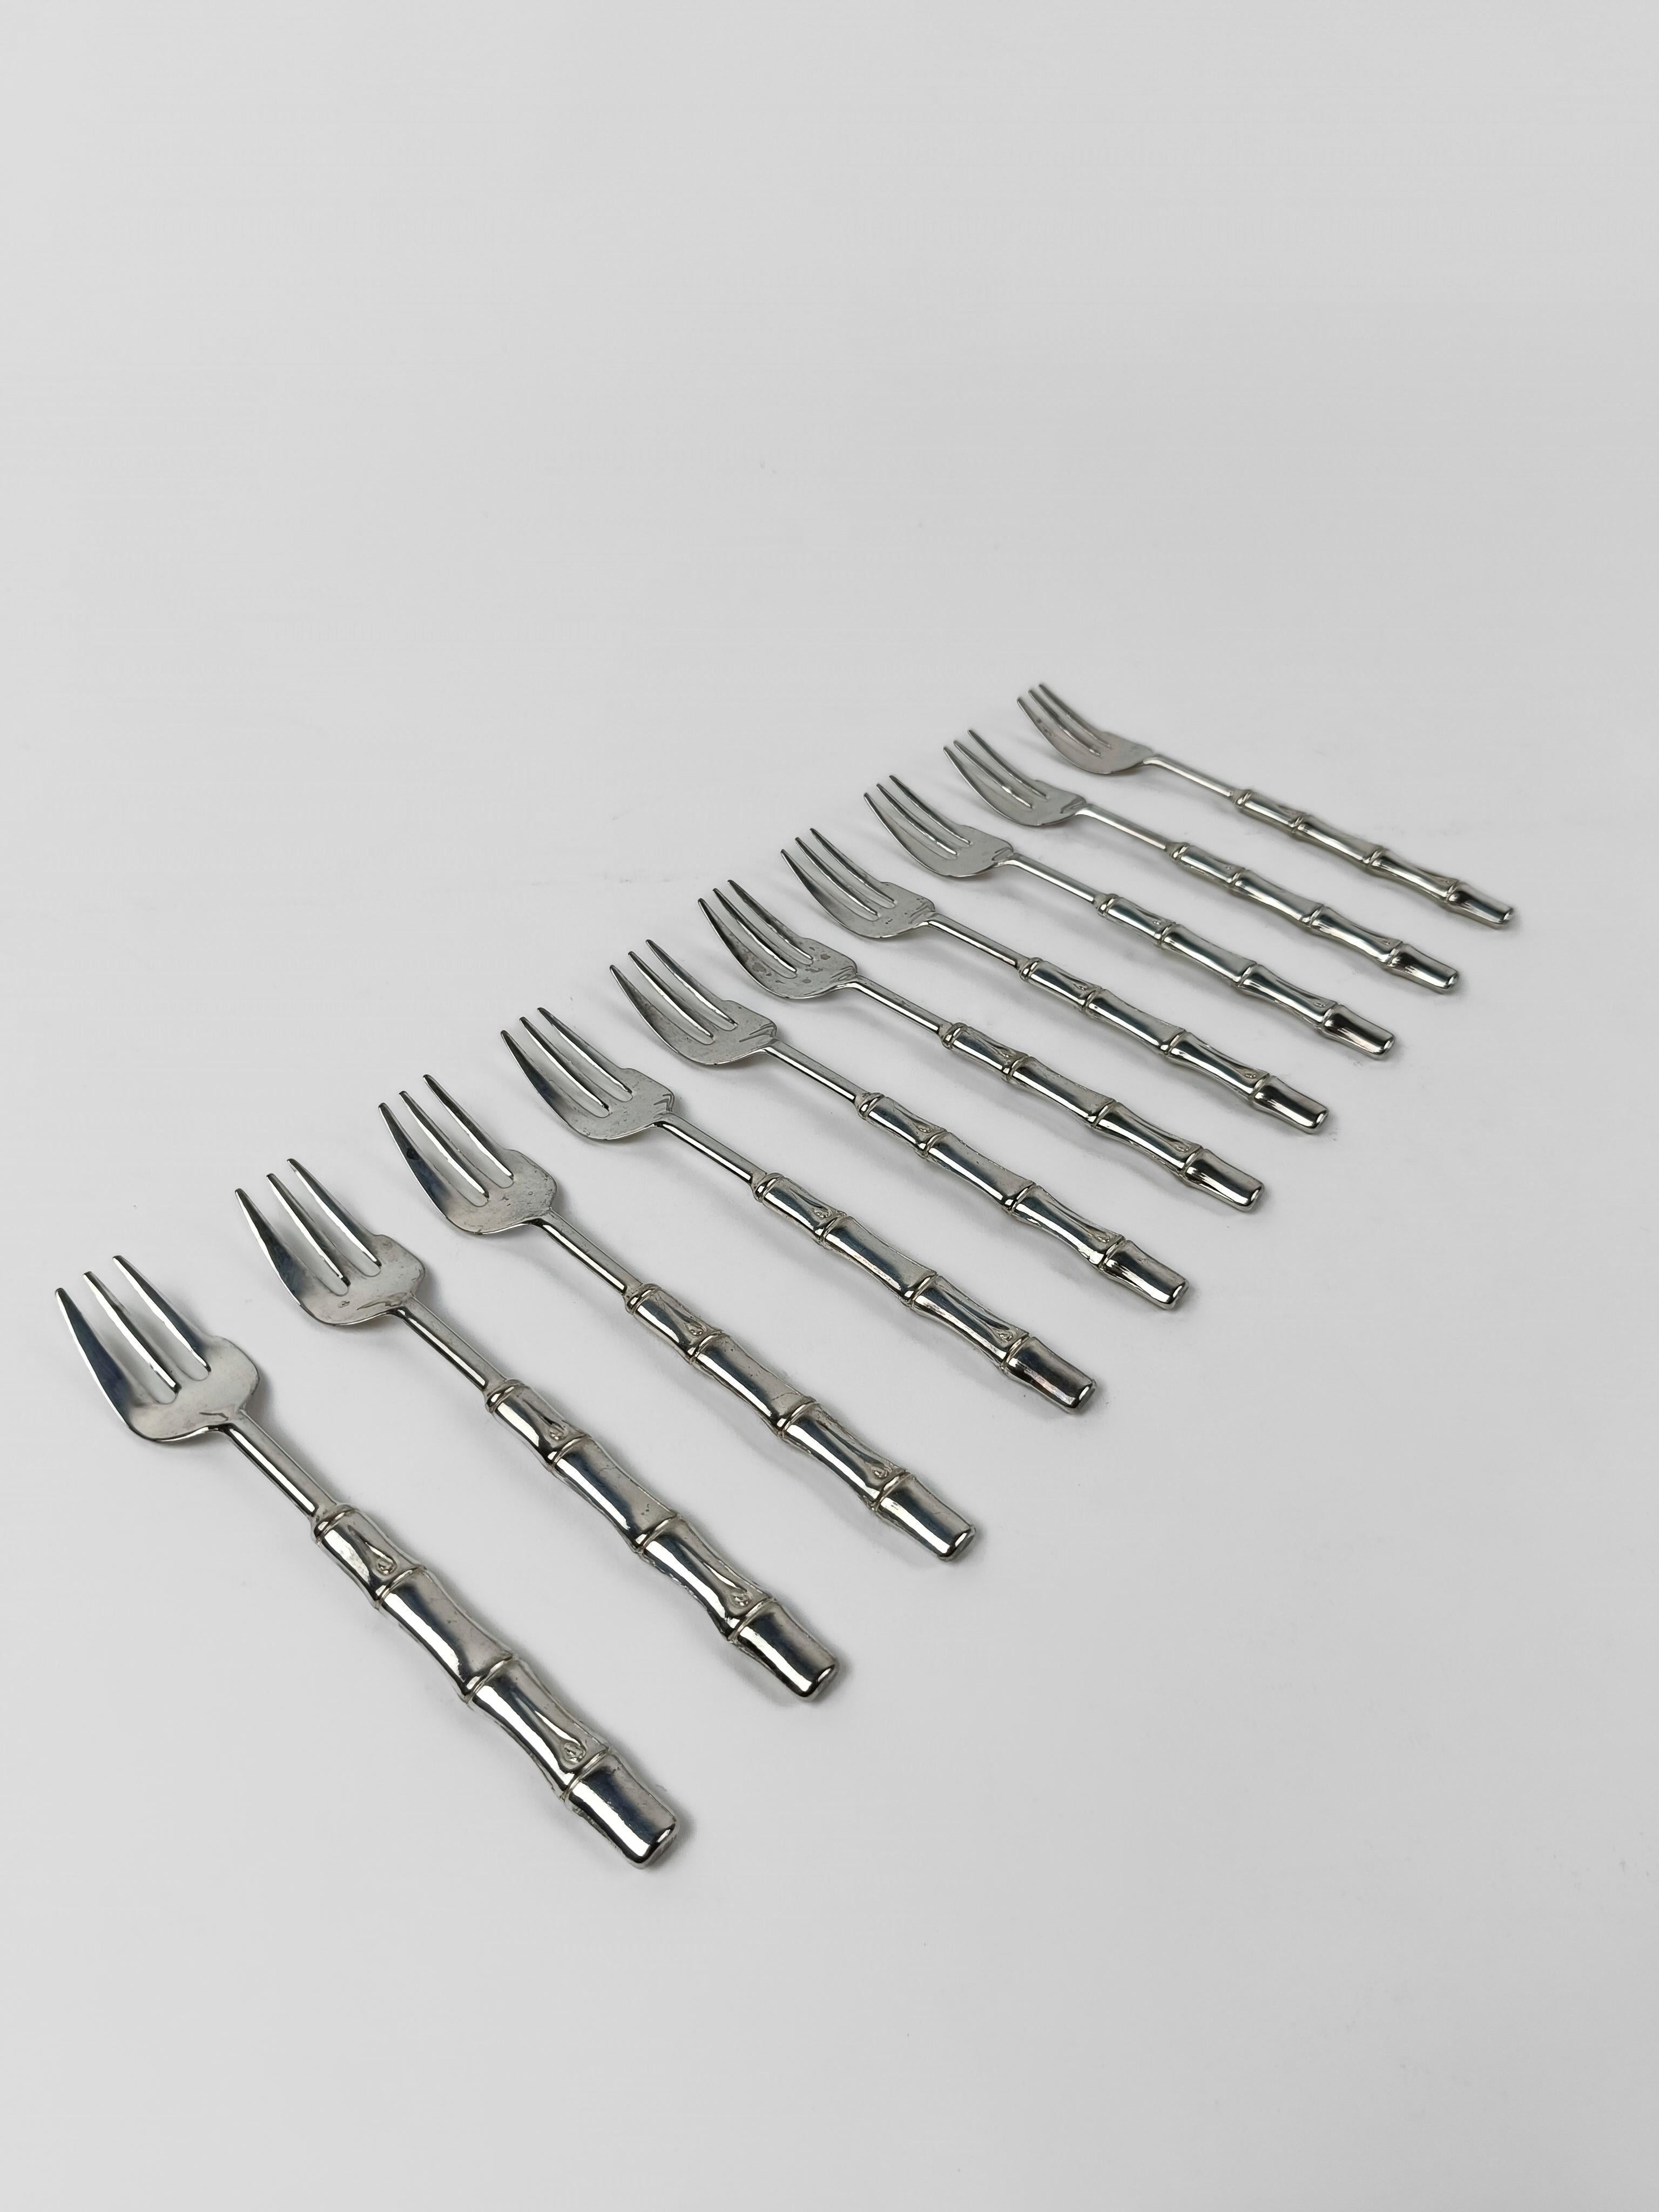 20th Century Vintage Flatware Set for 10 made in Silve Plated Faux Bamboo, Italy 1960s